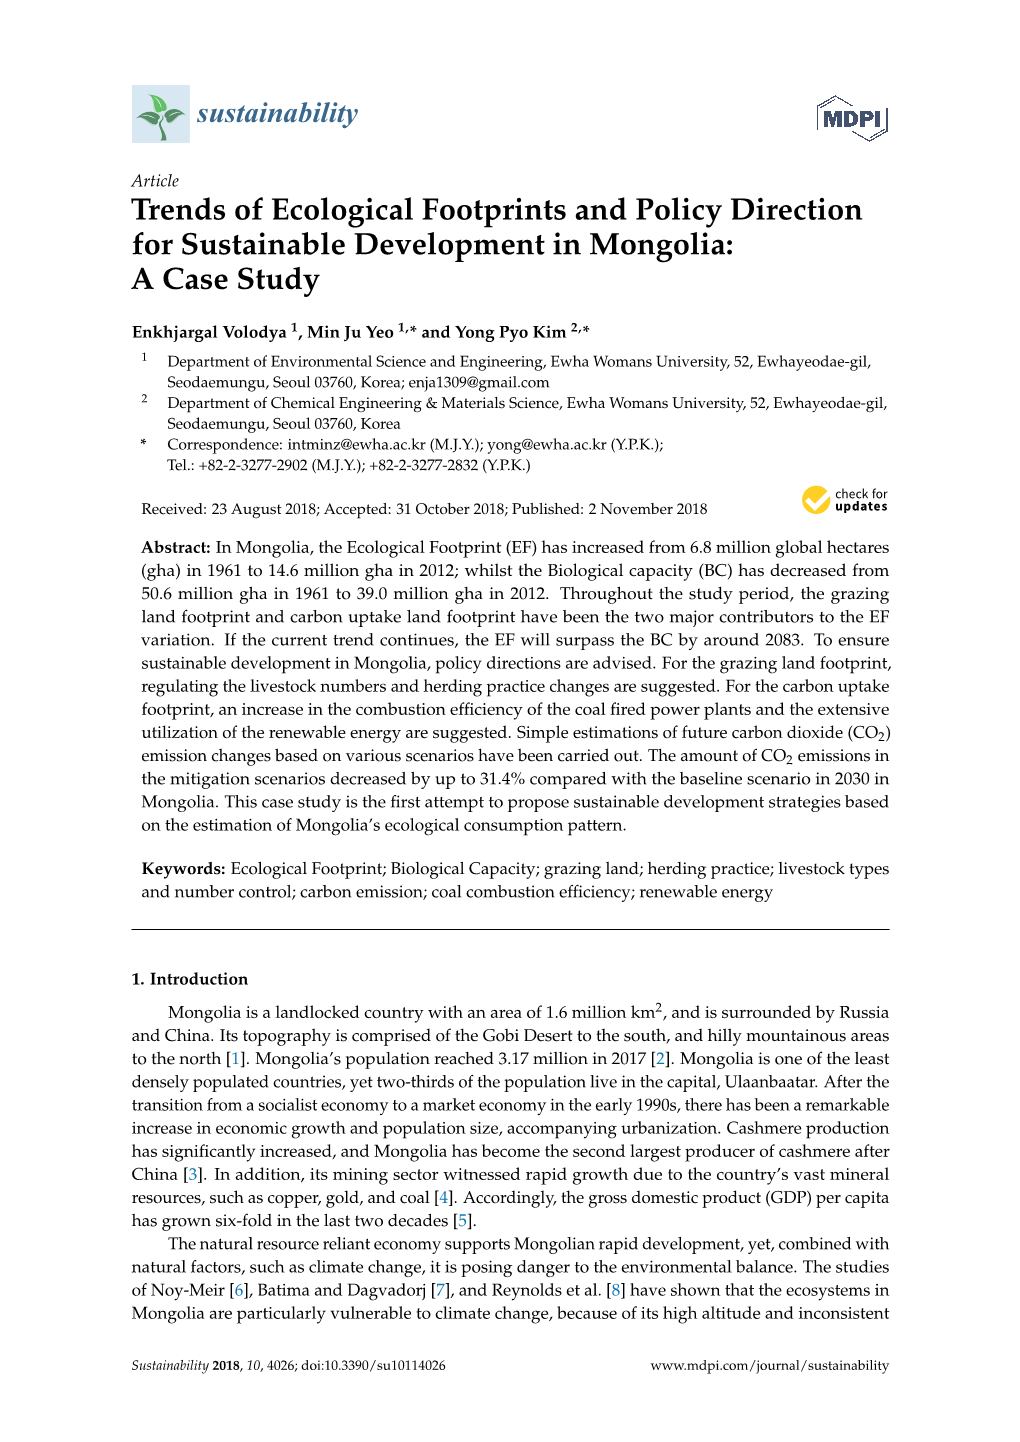 Trends of Ecological Footprints and Policy Direction for Sustainable Development in Mongolia: a Case Study